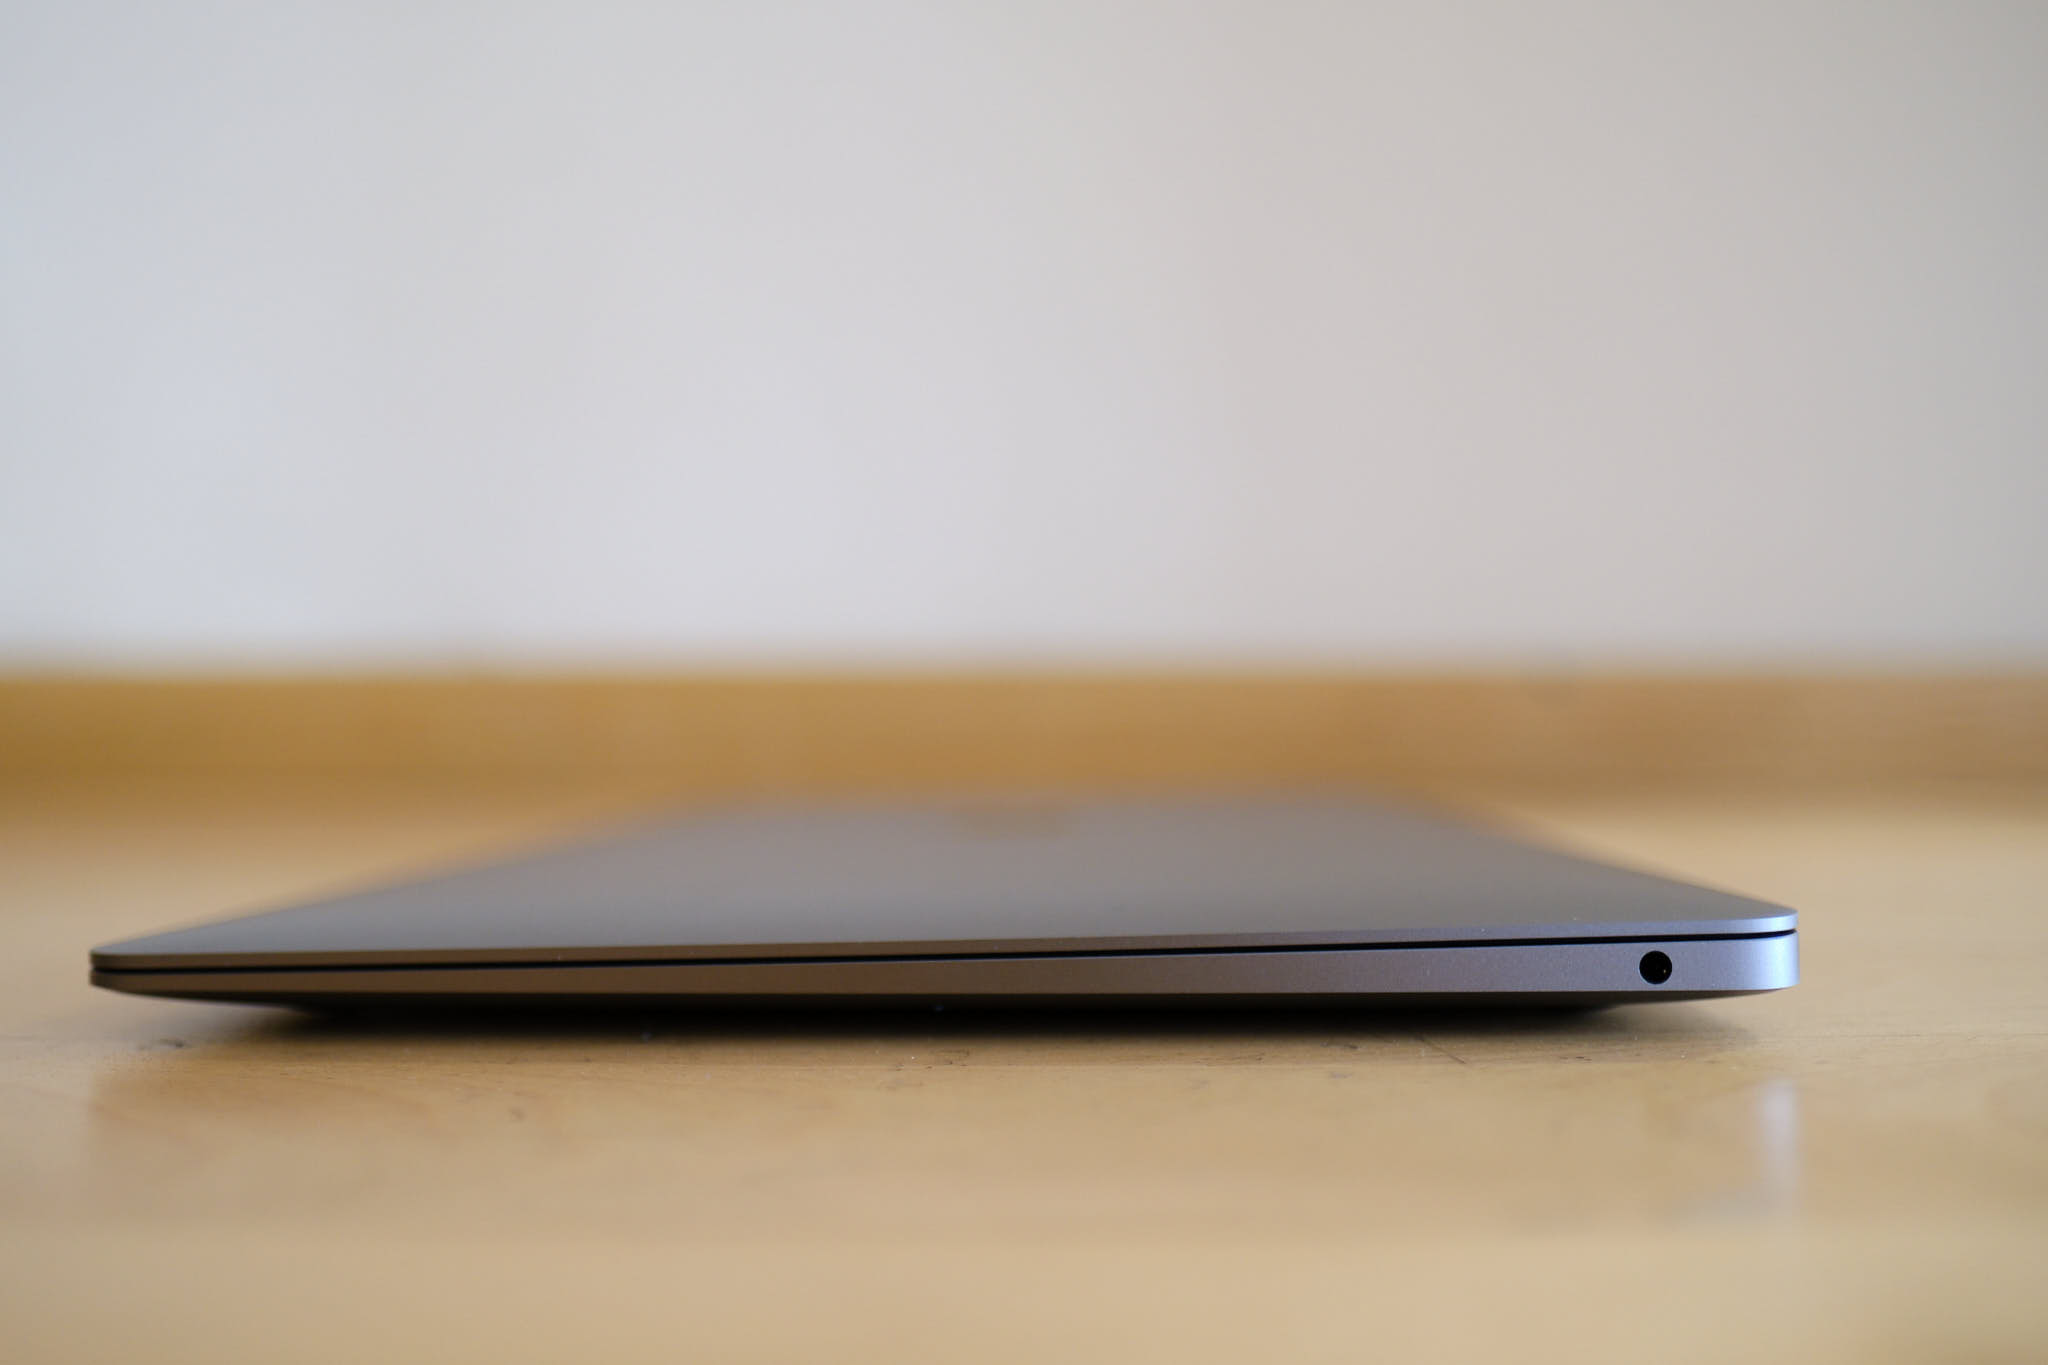 Apple MacBook Air (M1, Late 2020) review - the MacBook Air is a more viable  option than ever